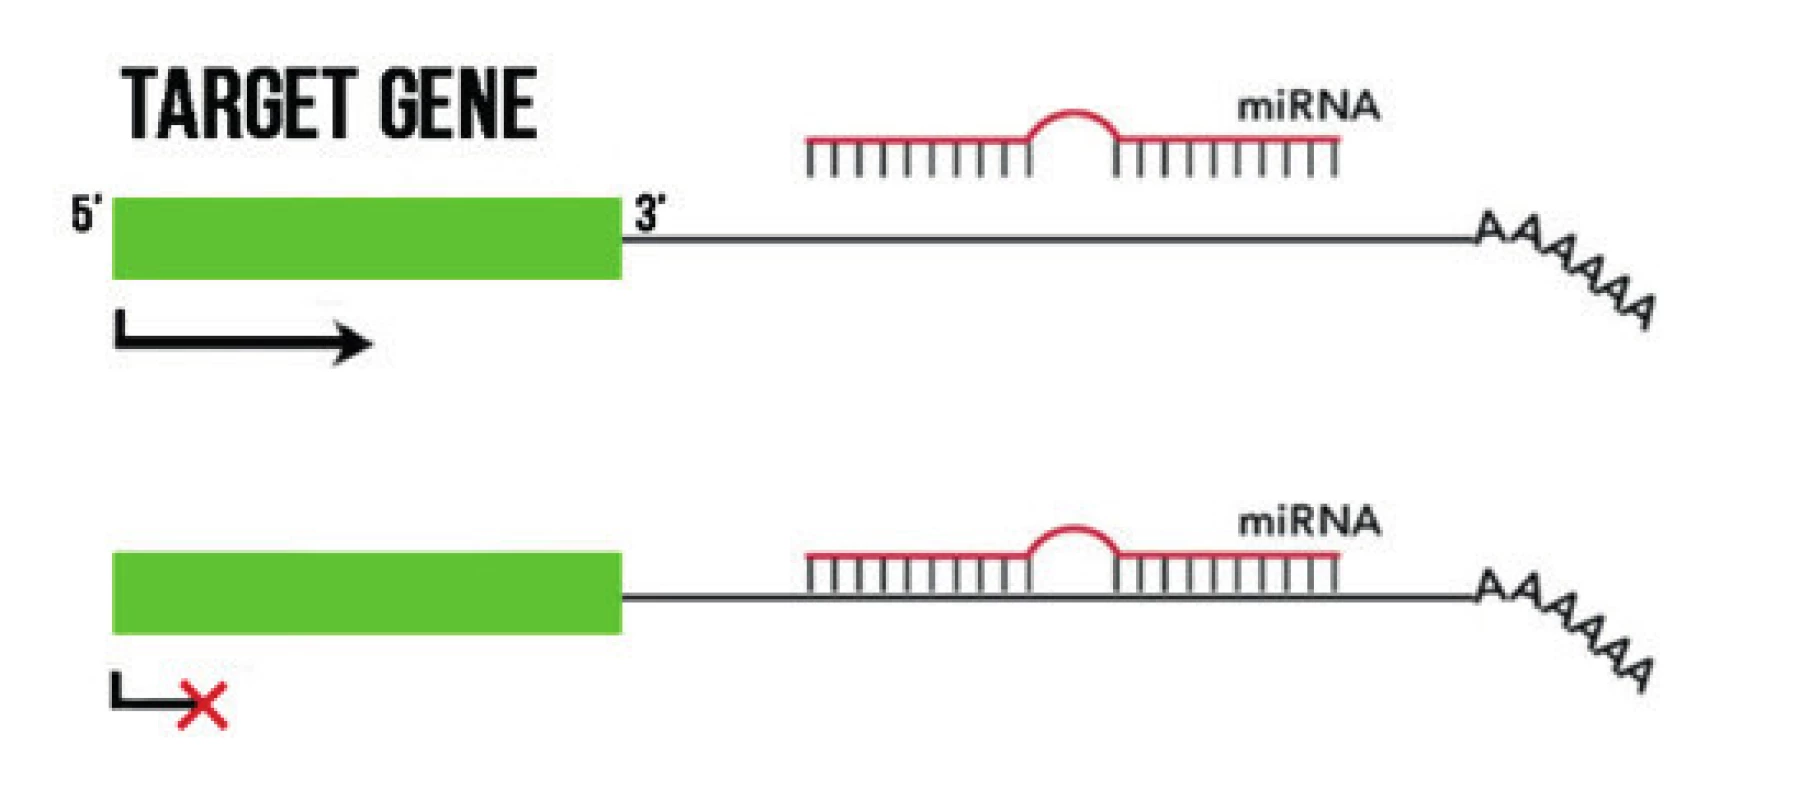 Mechanism of effect of miRNA. By binding to a complementary
sequence in 3 areas of the target mRNA it prevents their transcription.